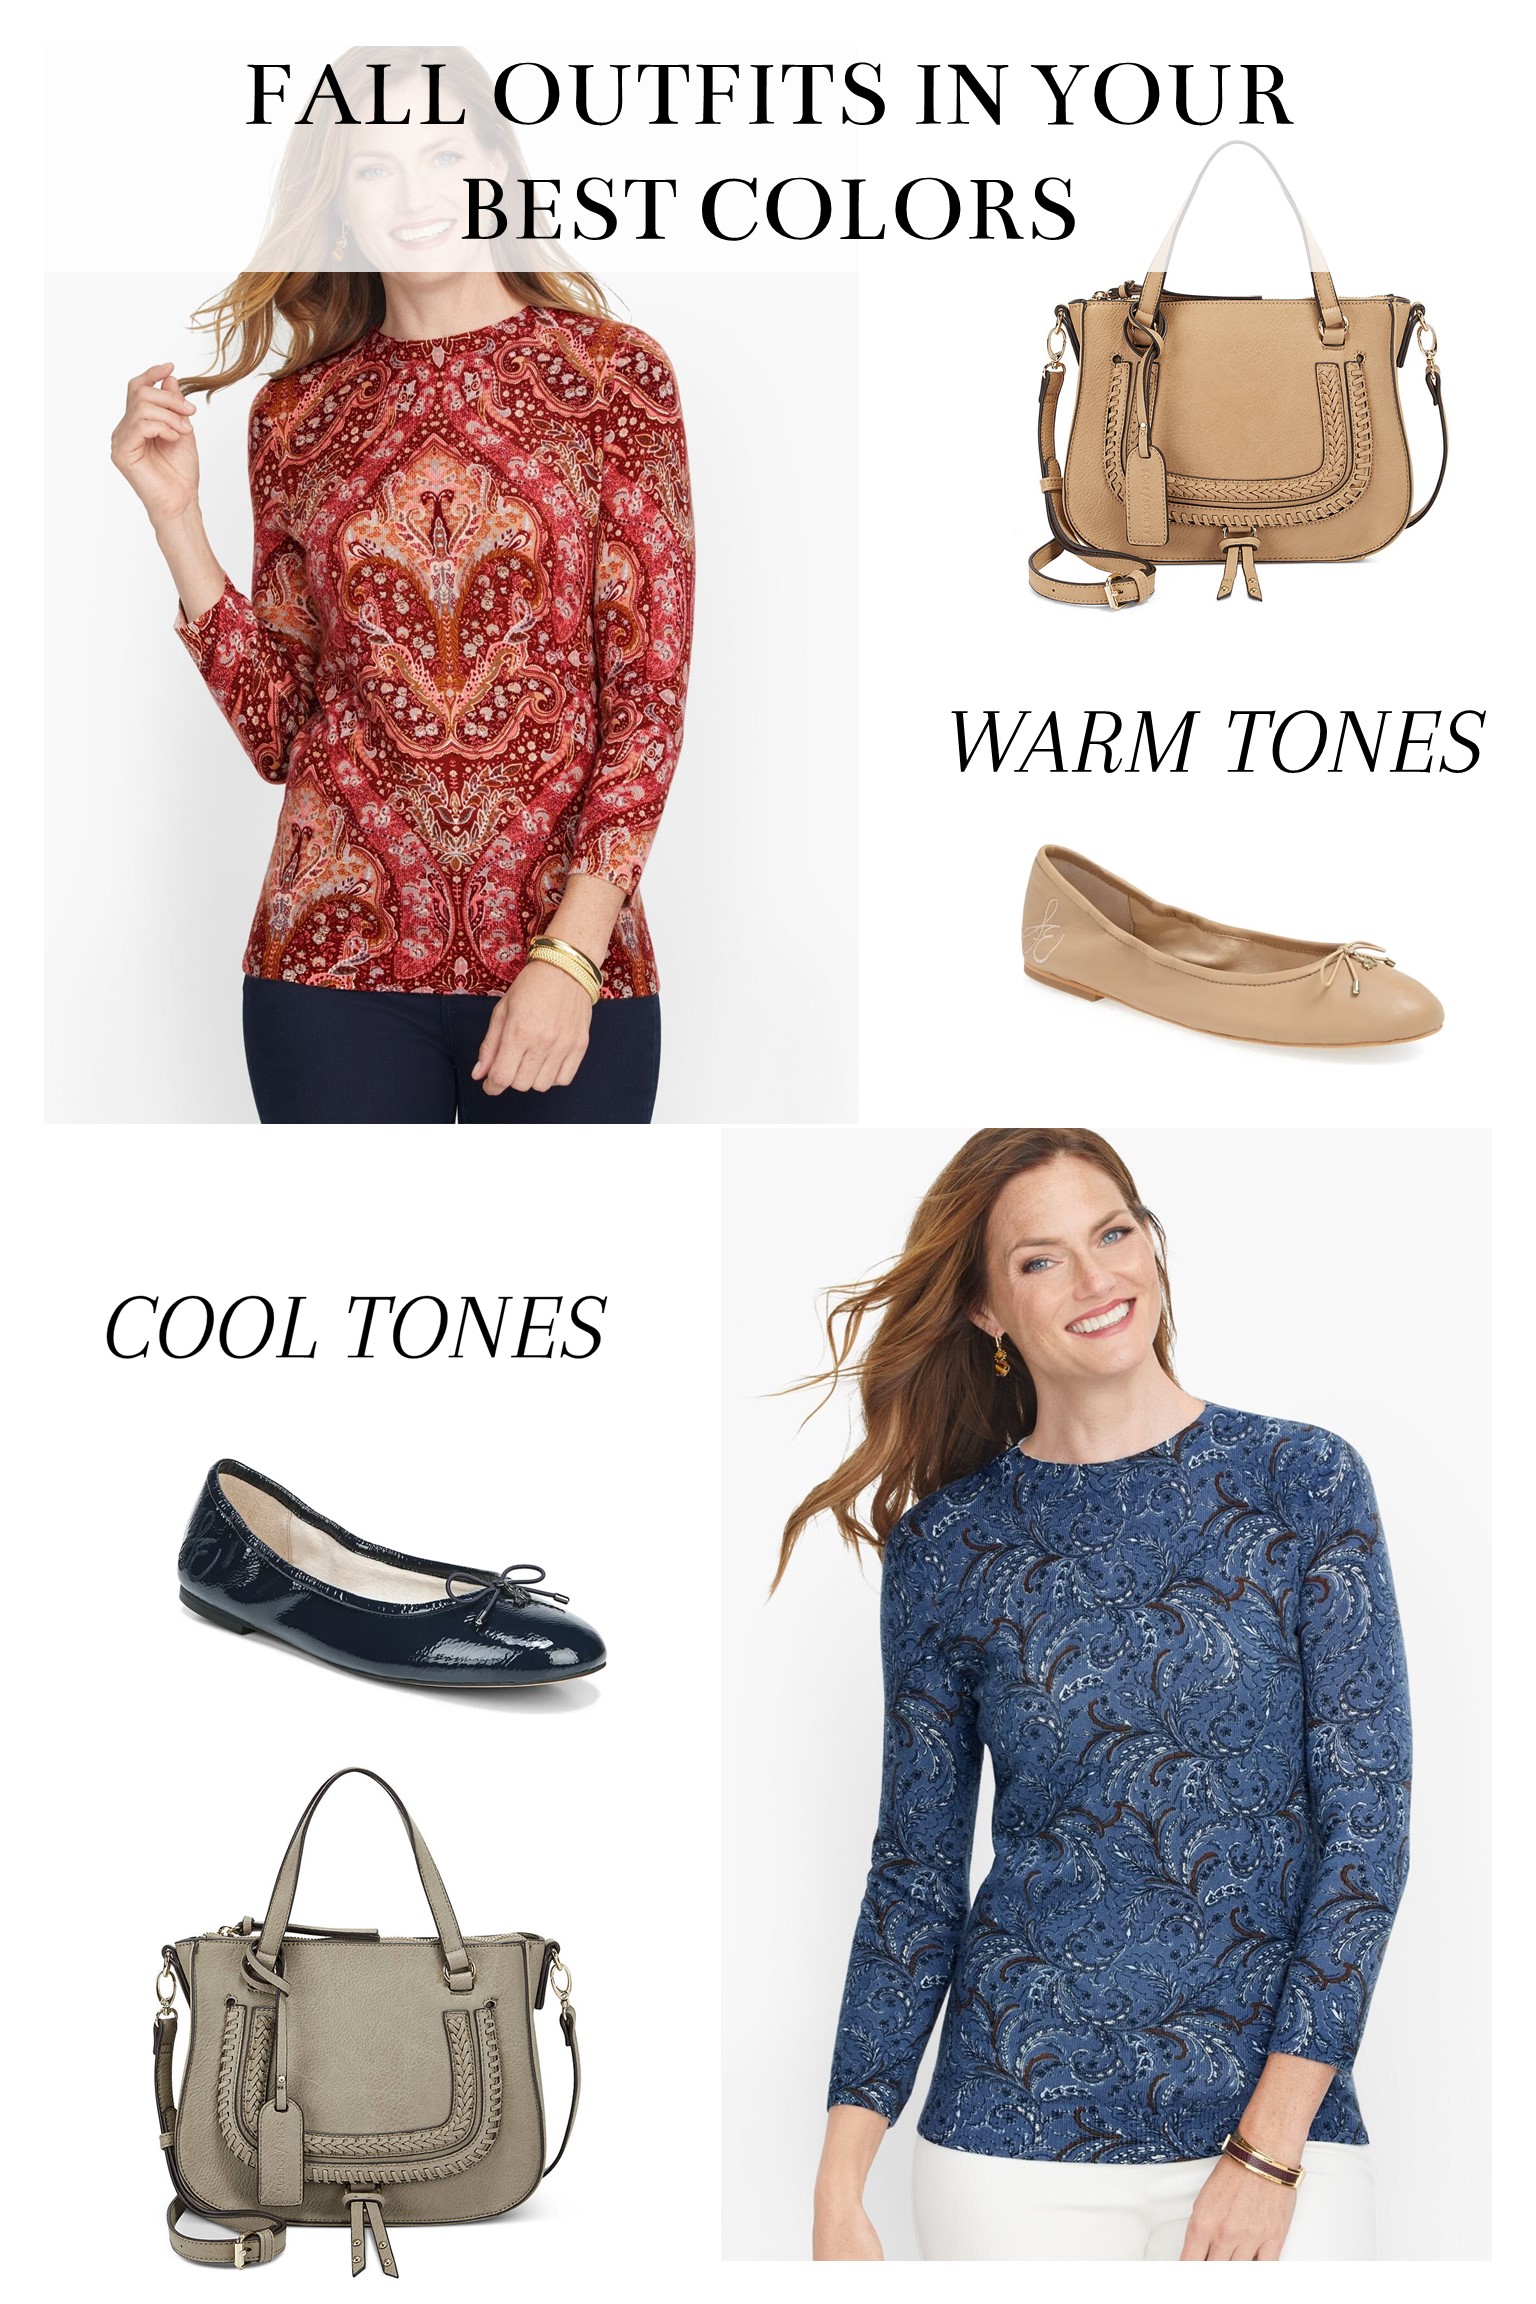 Fall Outfits in Your Best Colors